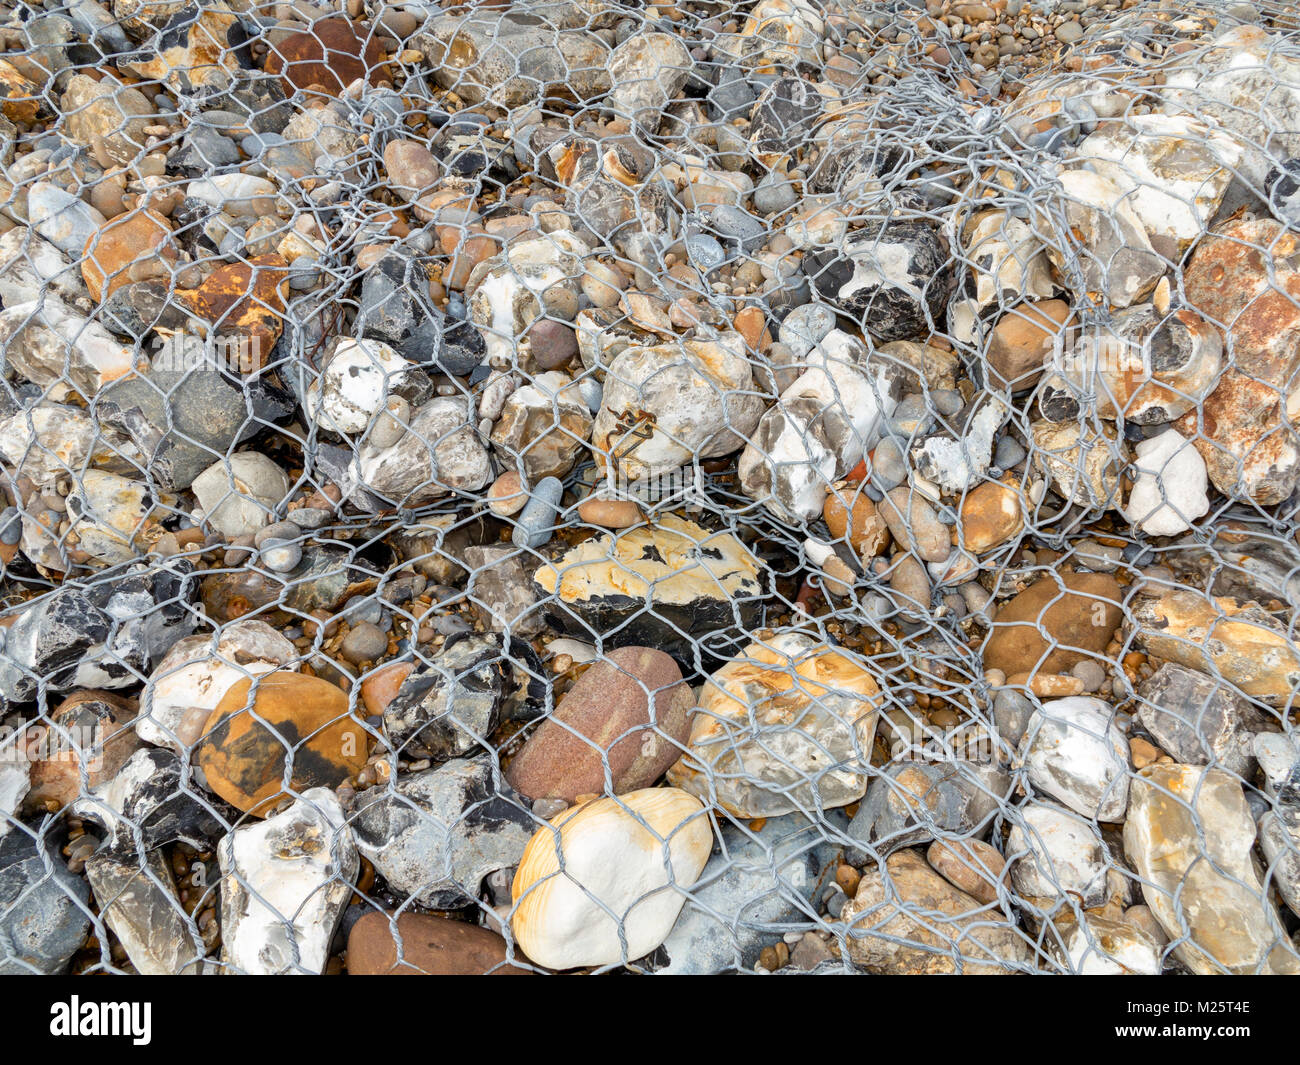 Sea defences made from wire mesh cages containing large beach pebbles Stock Photo